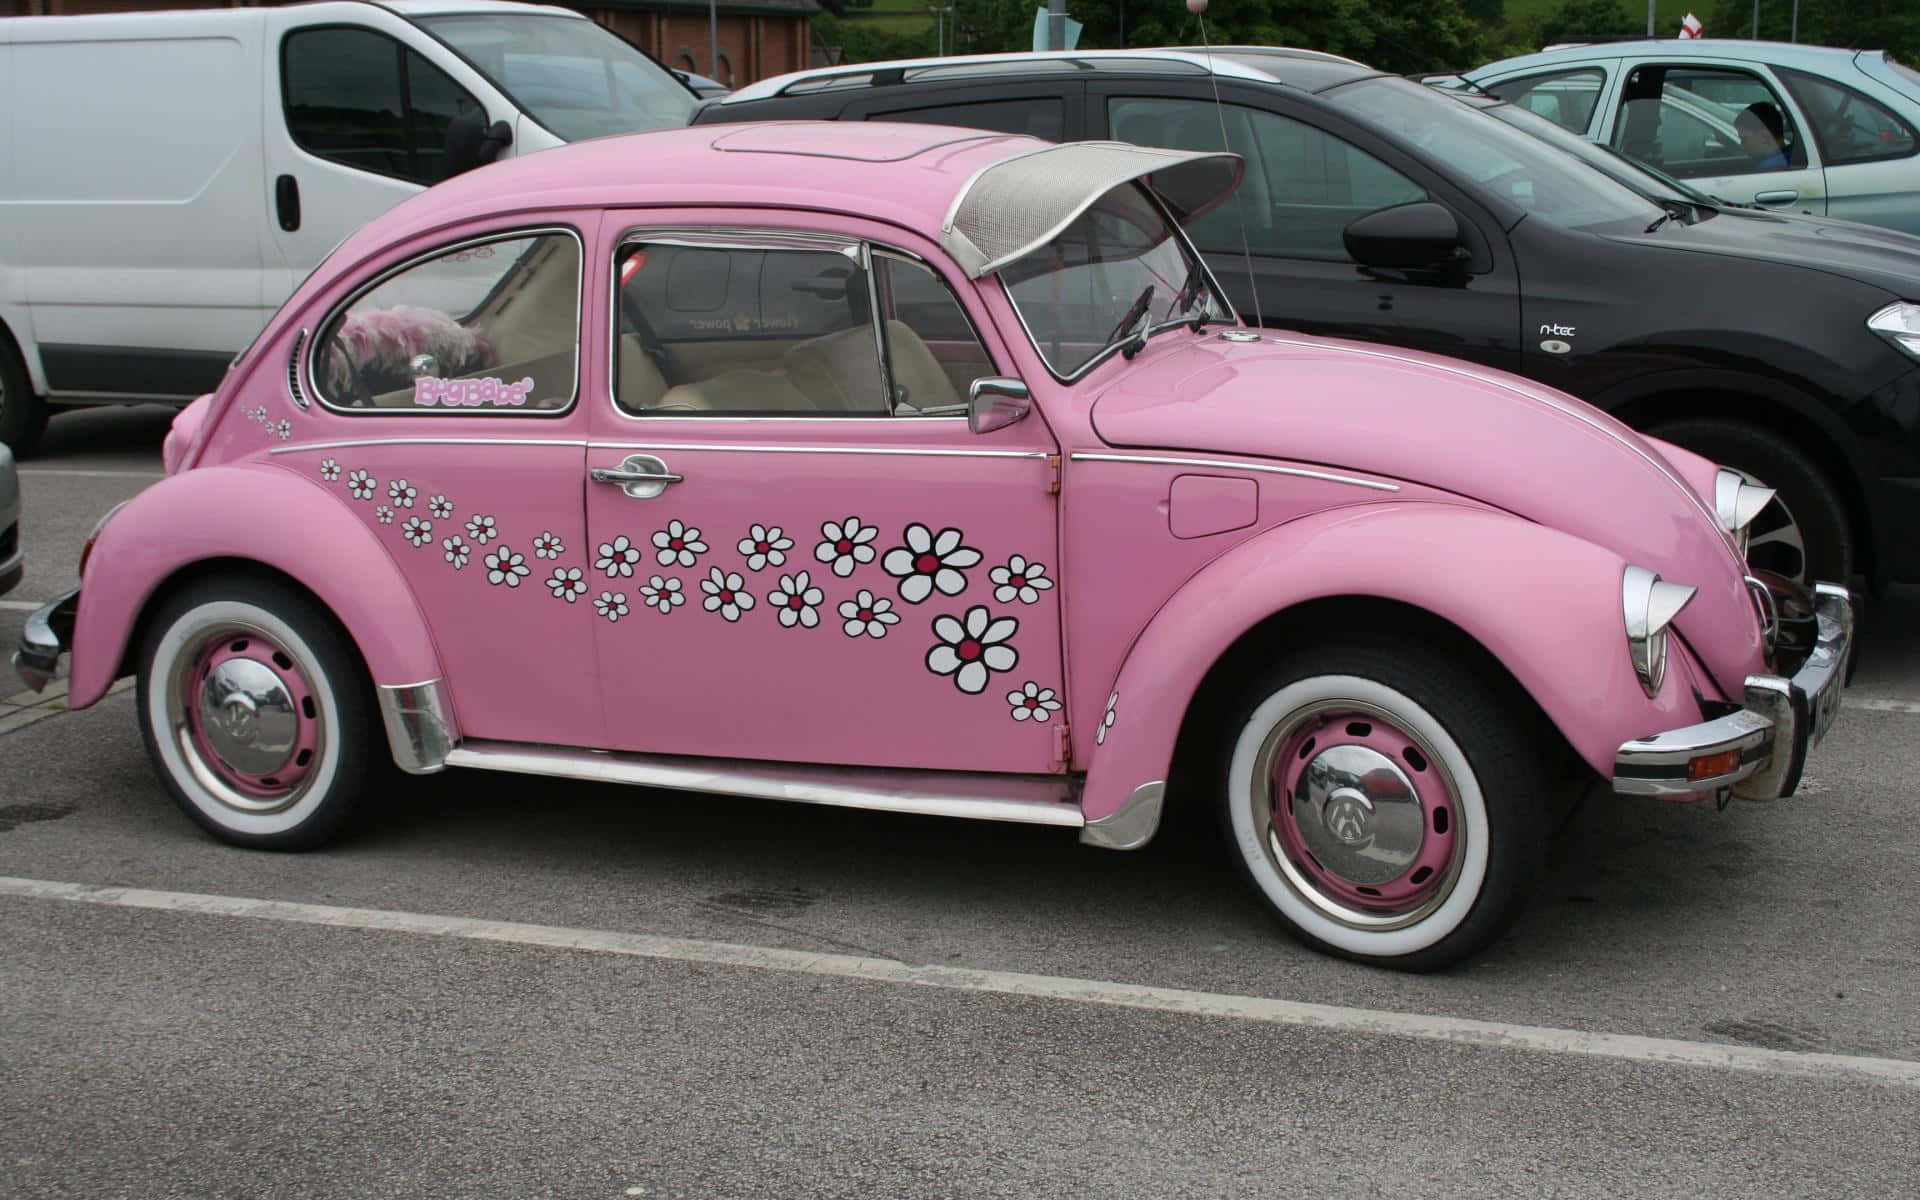 A Pink Volkswagen Beetle Parked In A Parking Lot Wallpaper